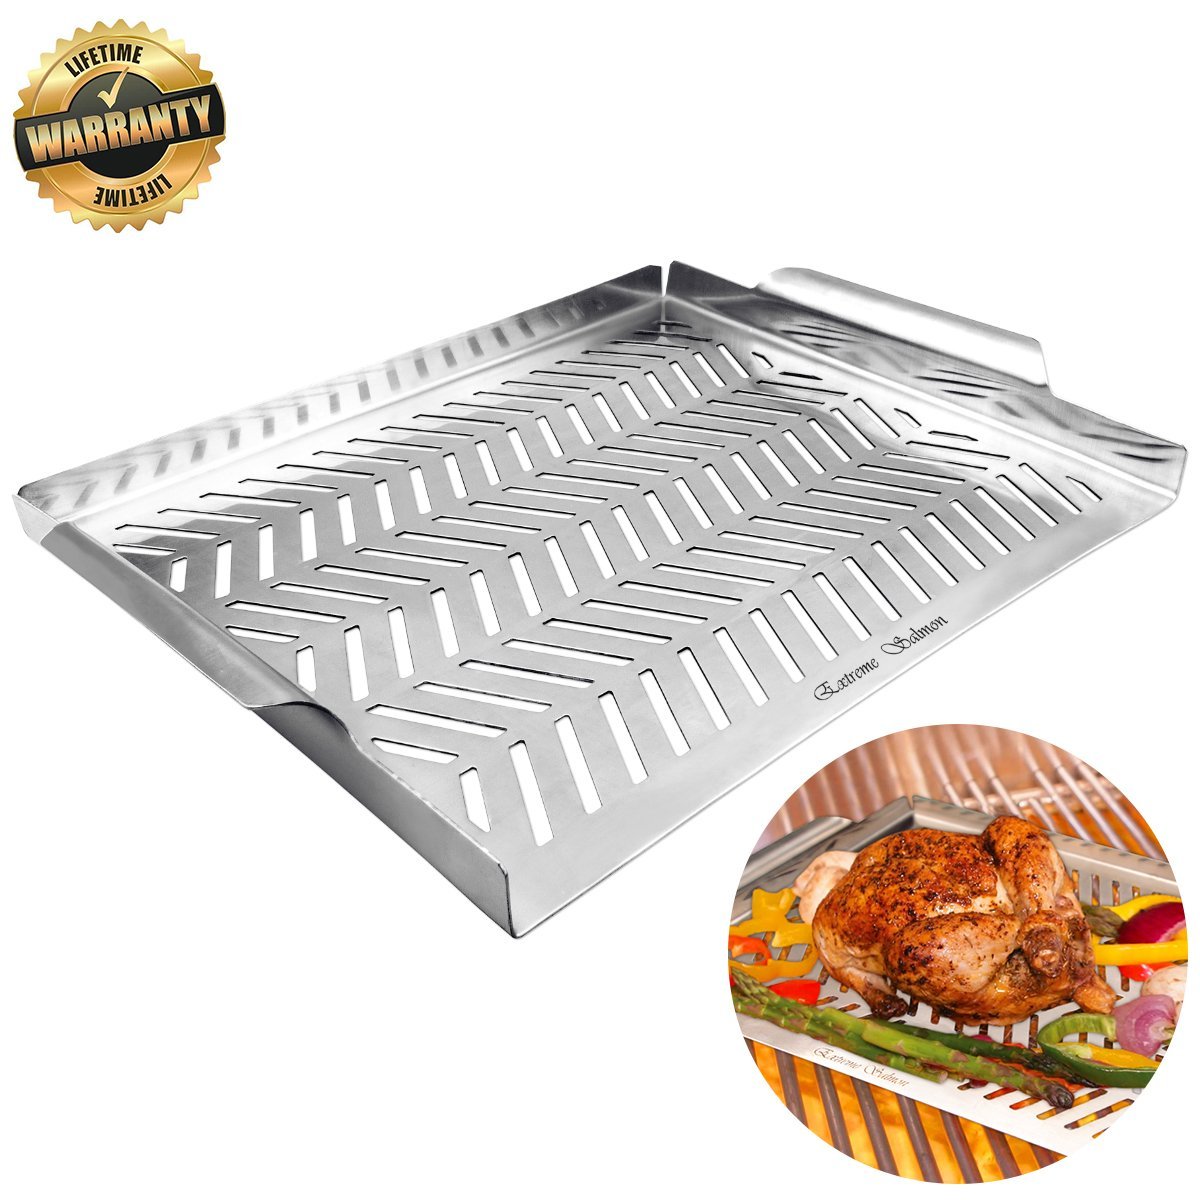 Stainless Steel Grill Topper Pan